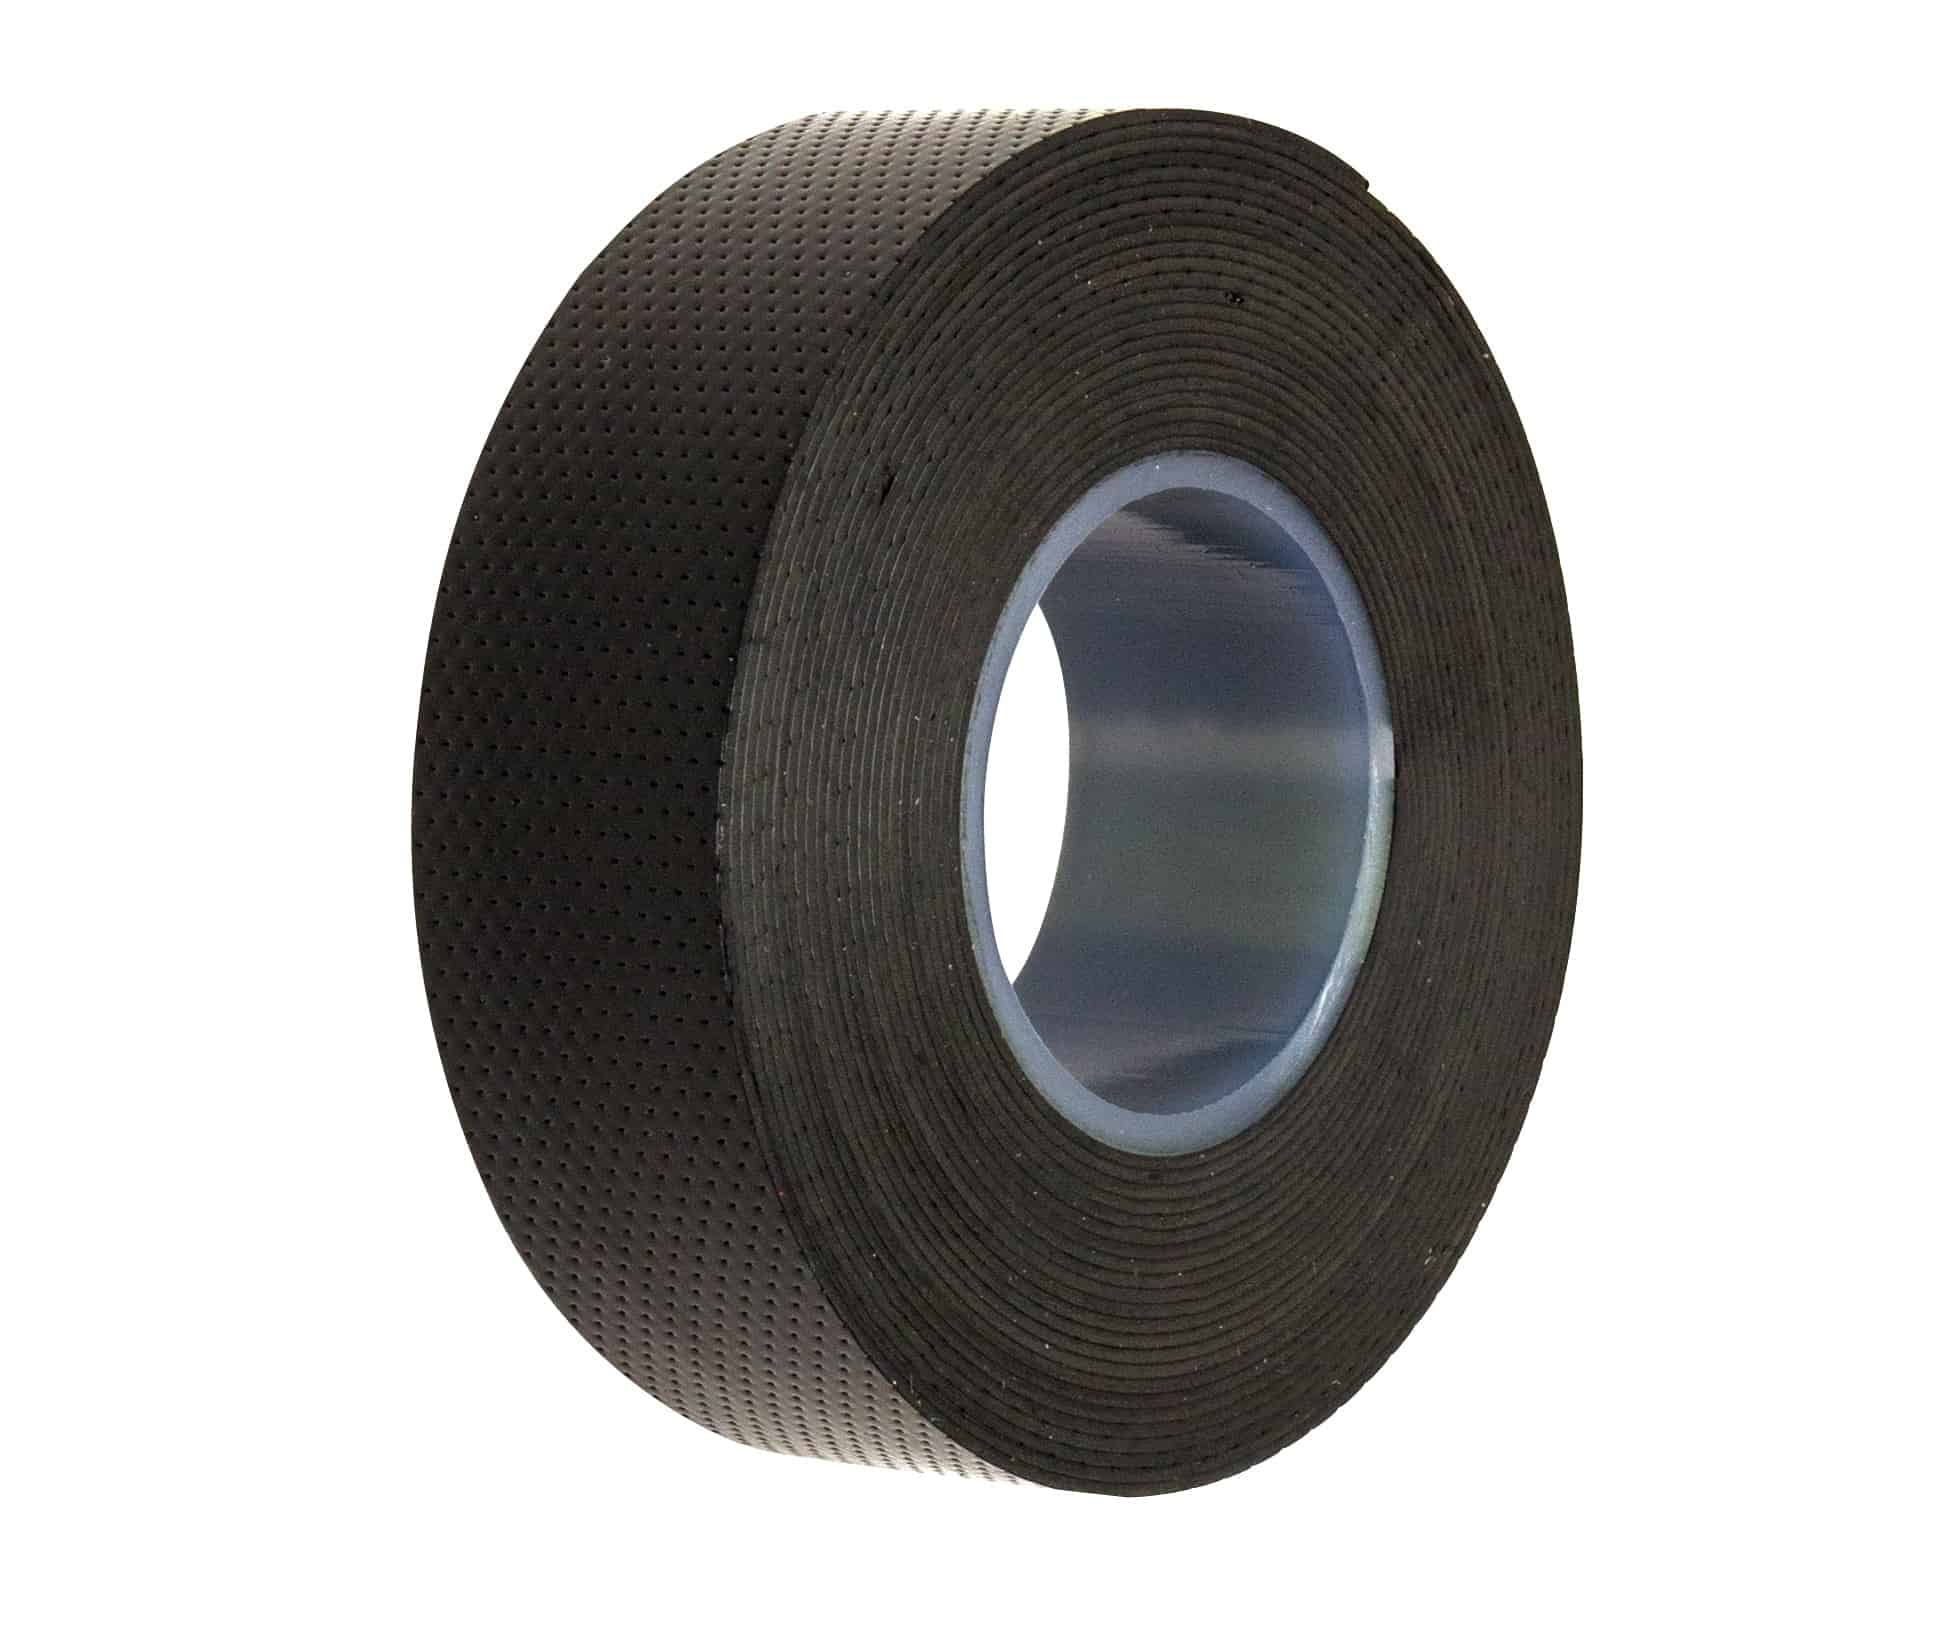 TEMPORARY REPAIR TAPE - Climaloc Solutions